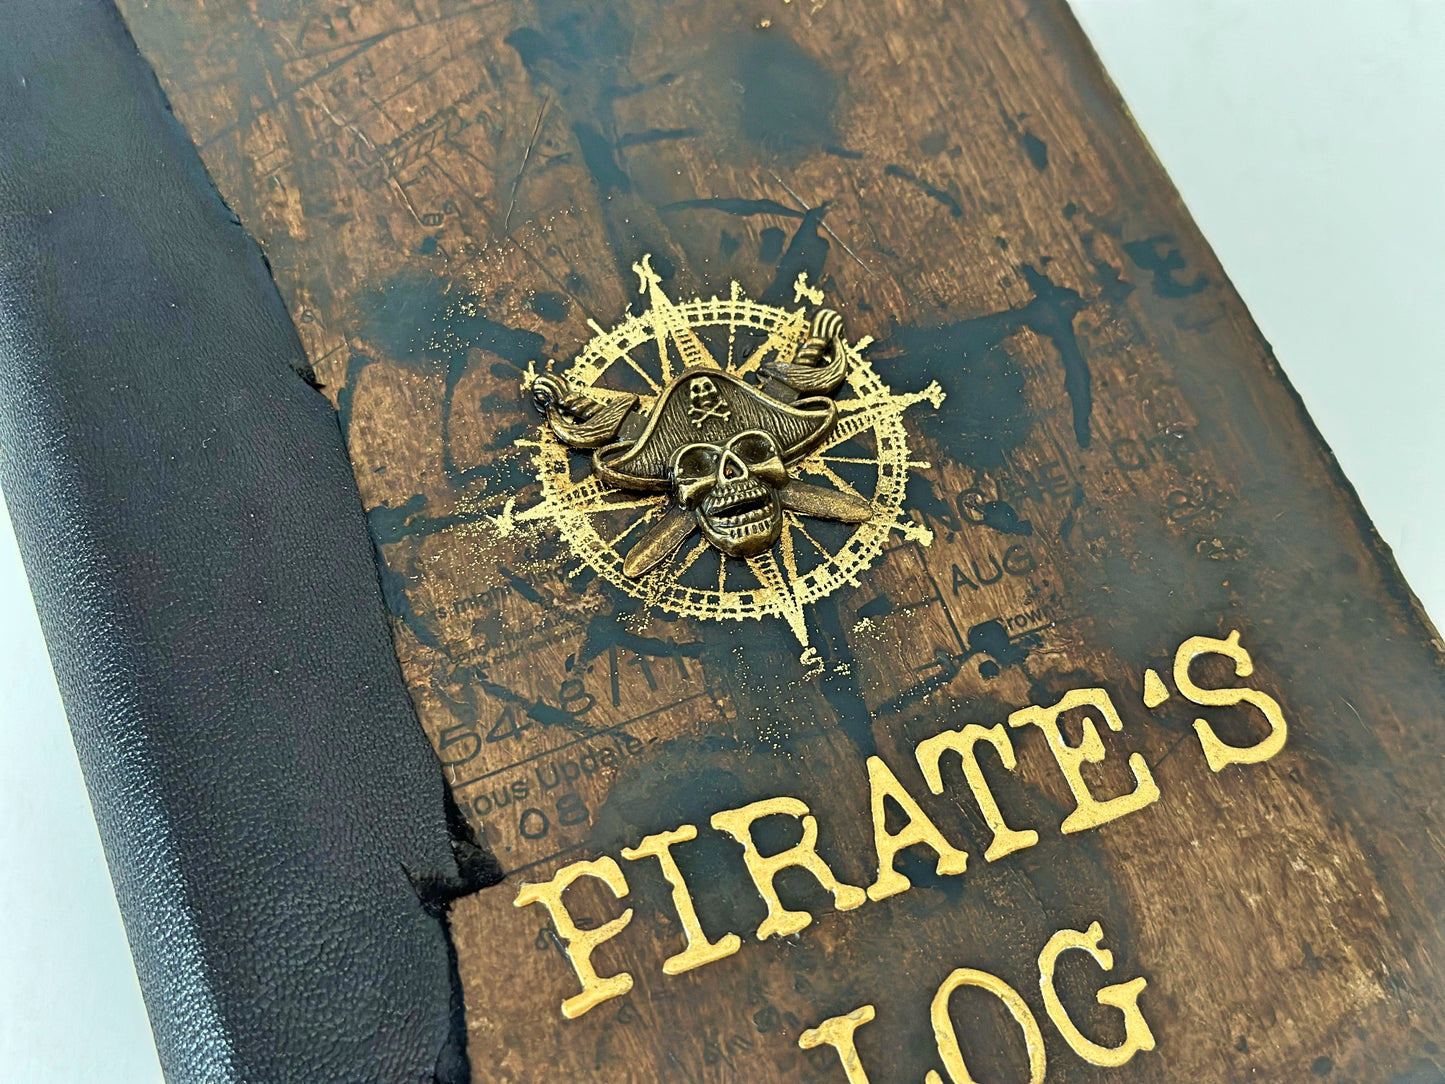 Pirate's log Journal Book, Nautical Travel Journal Sketchbook, Cosplay Spellbook , Sea Lover Diary Notebook Gift for Captain Scrapbook